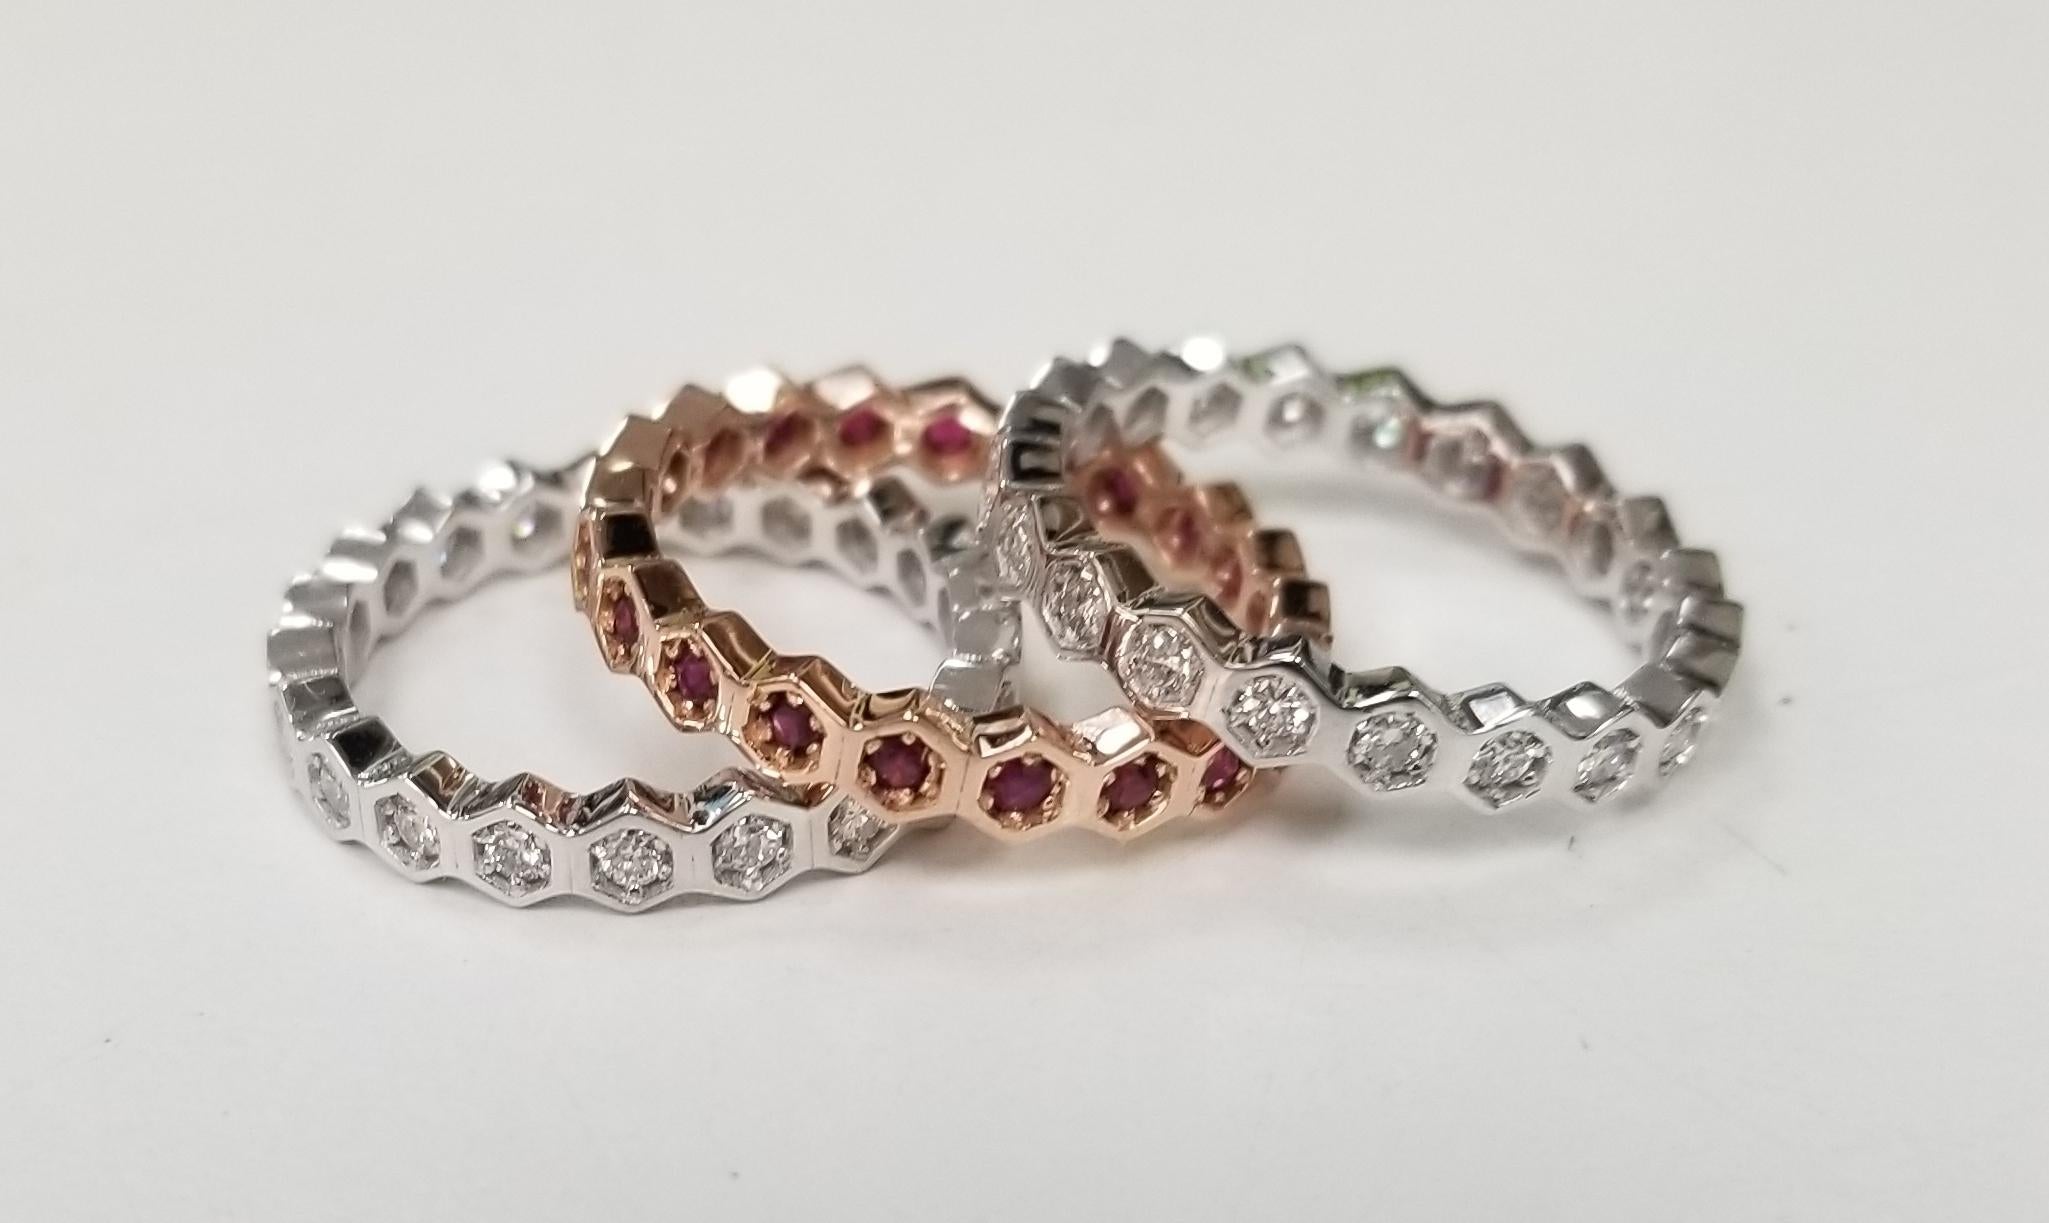 14k white and rose gold stack-able rings;
stones: 42 round diamonds 
color: G
clarity: VS
weight: .90pts.
additional stones: 21 rubies
weight: .47pts.
gold: 14k
size: 6.5
*pick color combinations*
